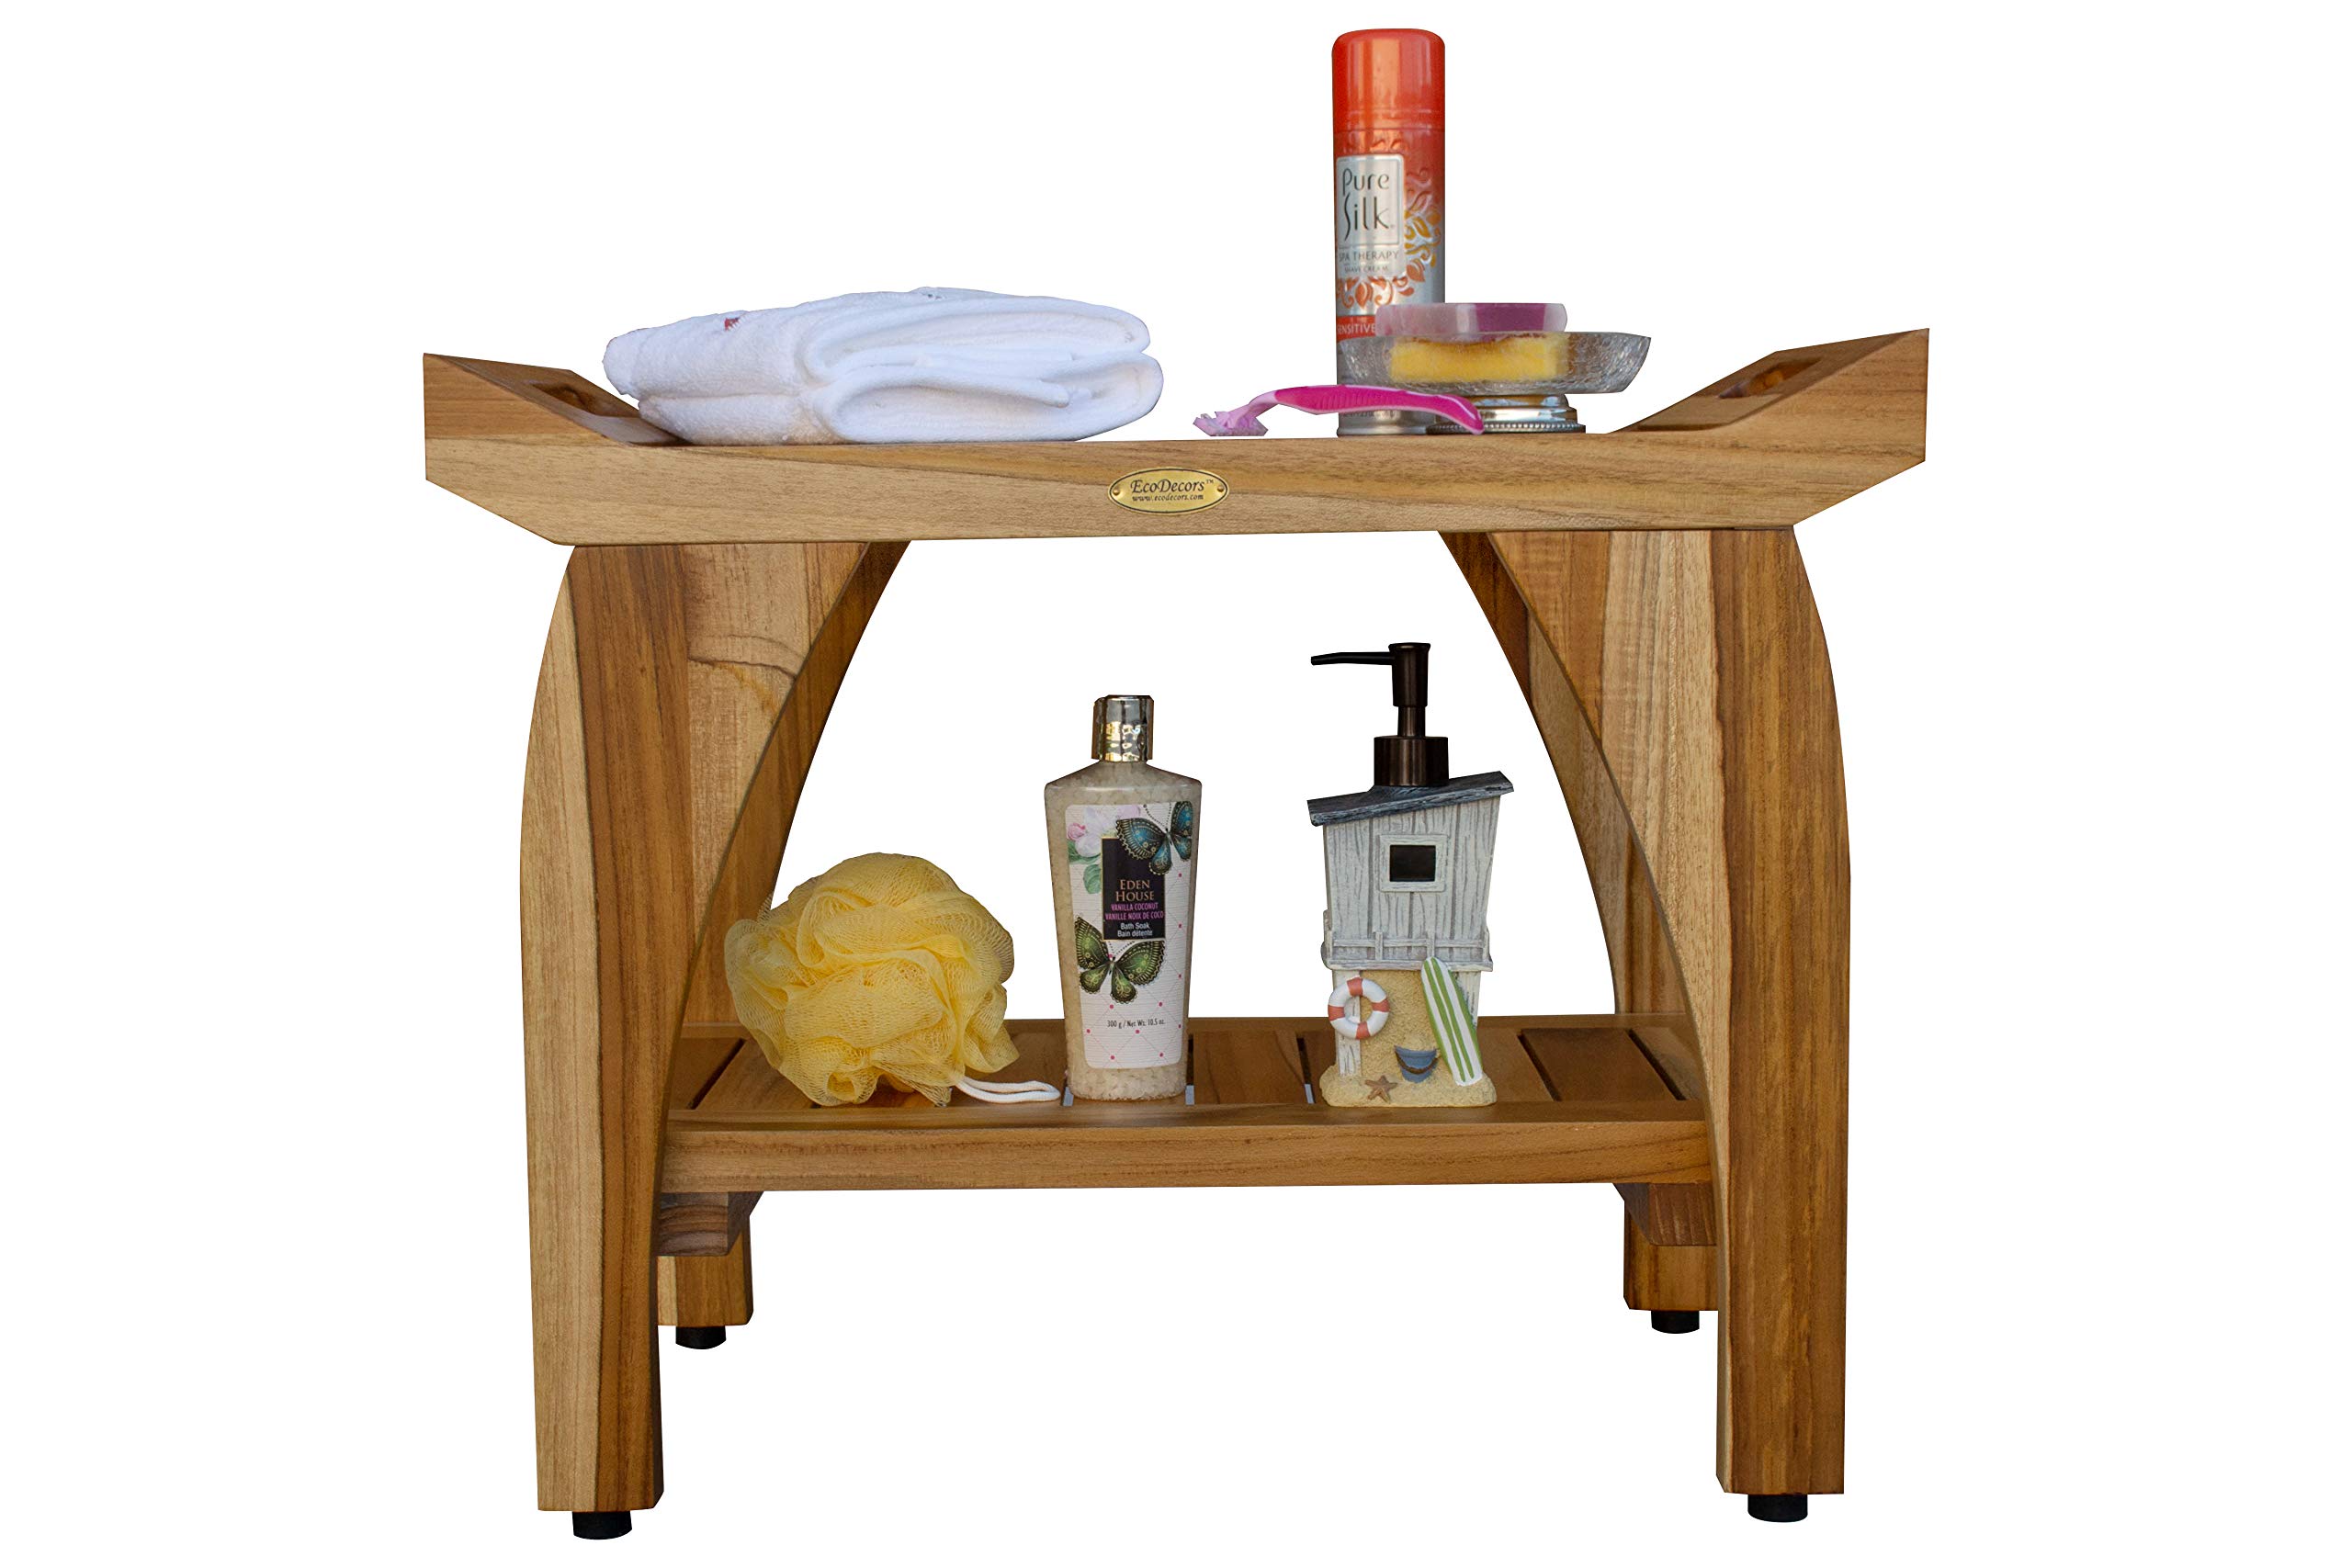 EcoDecors Earthy Teak Tranquility Shower Bench Natural Wood Shower Stool With Storage Shelf and LiftAide Arms for Indoors and Outdoors -24 inches Length